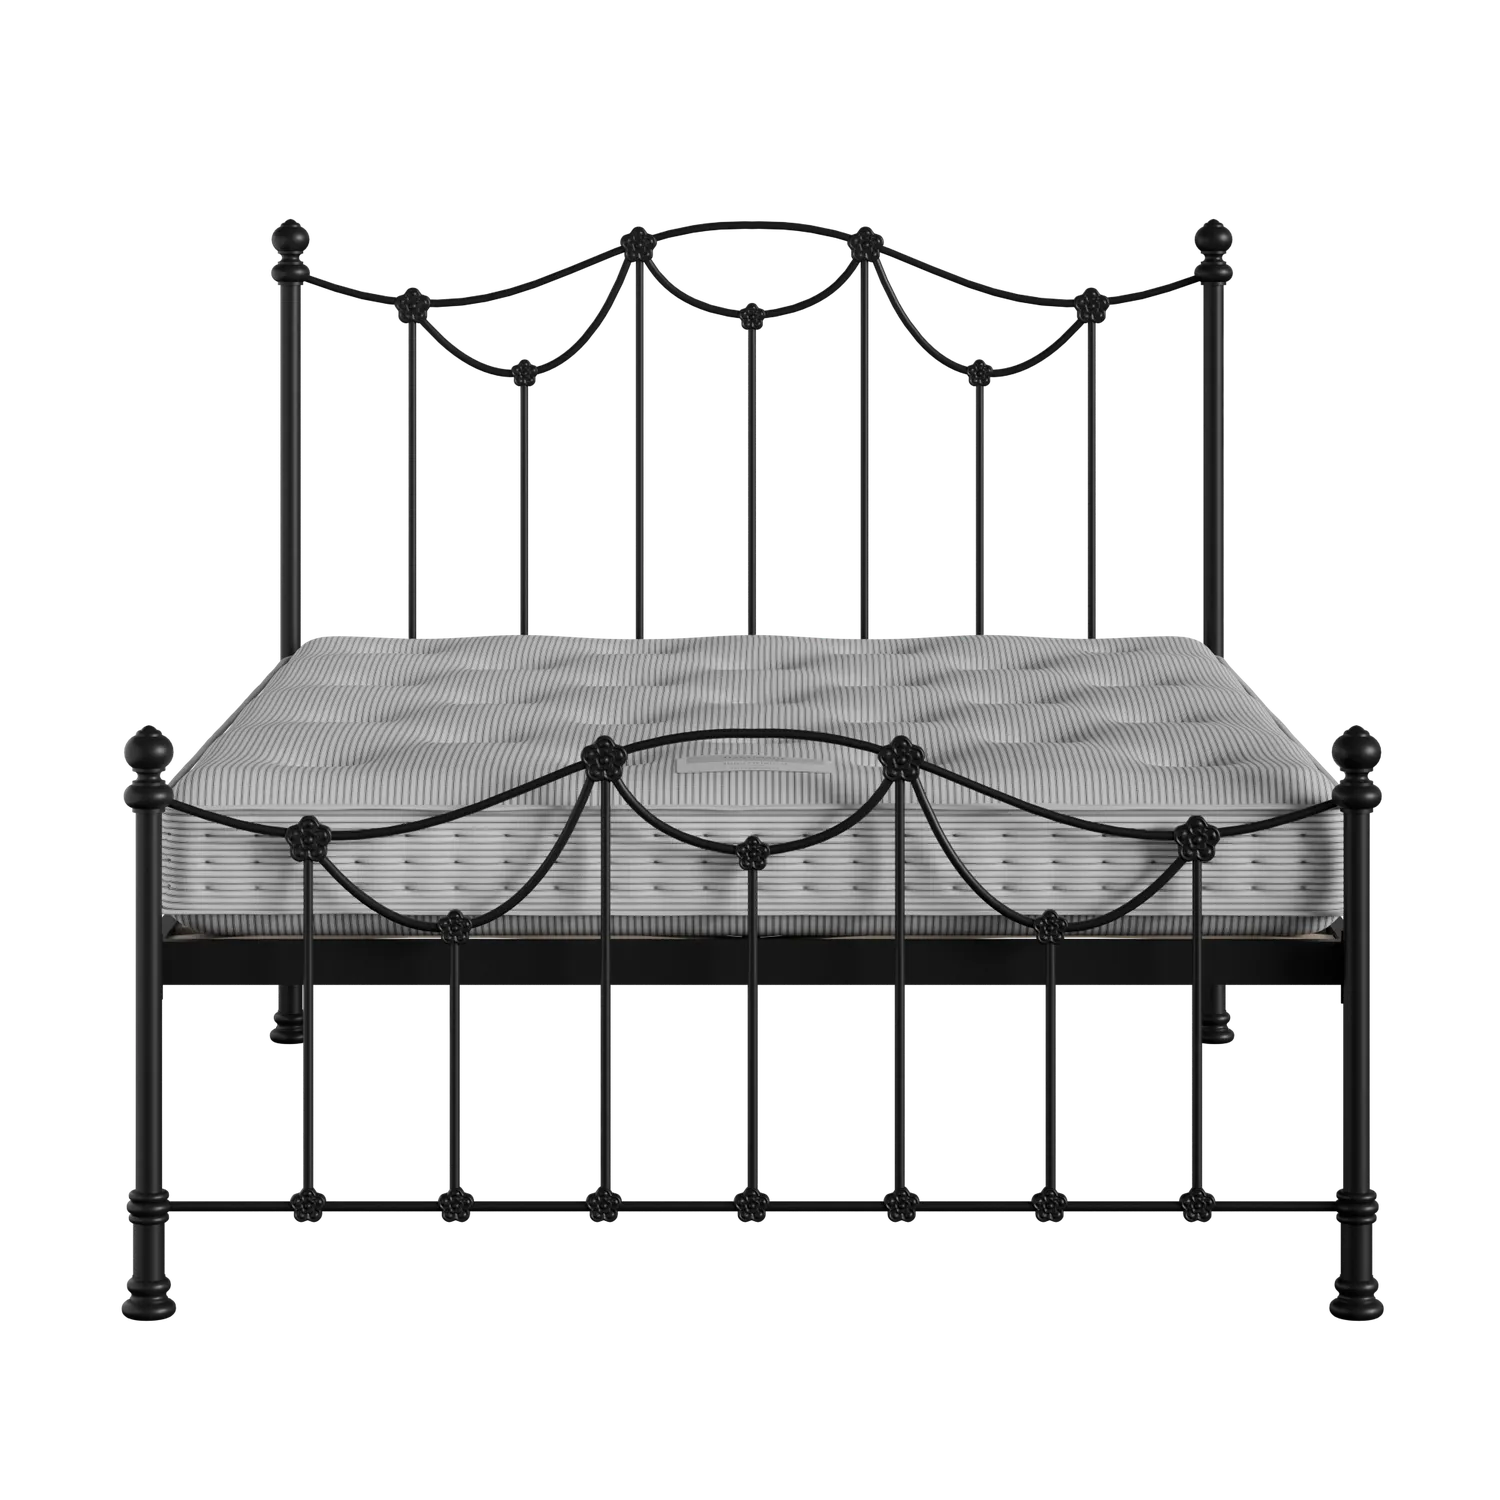 Carie Low Footend iron/metal bed in black with Juno mattress